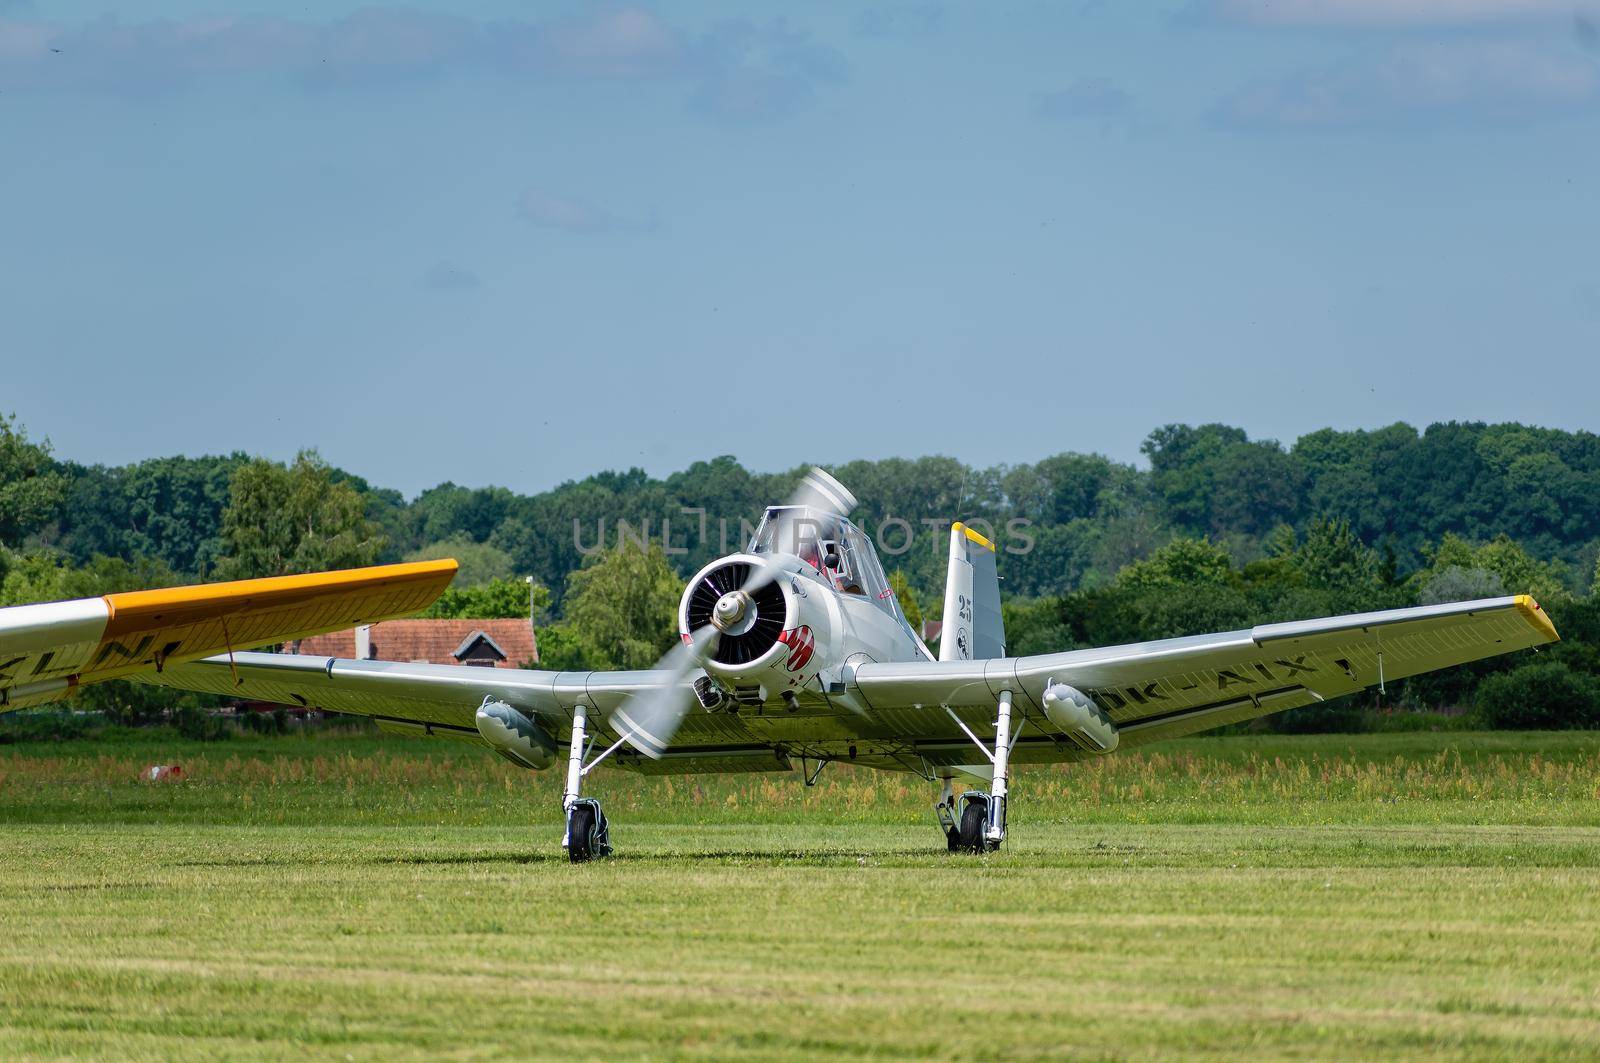 Breclav, Czech Republic - July 02, 2022 Aviation Day. Zlin Z-37A-2 Bumblebee aircraft used in agriculture